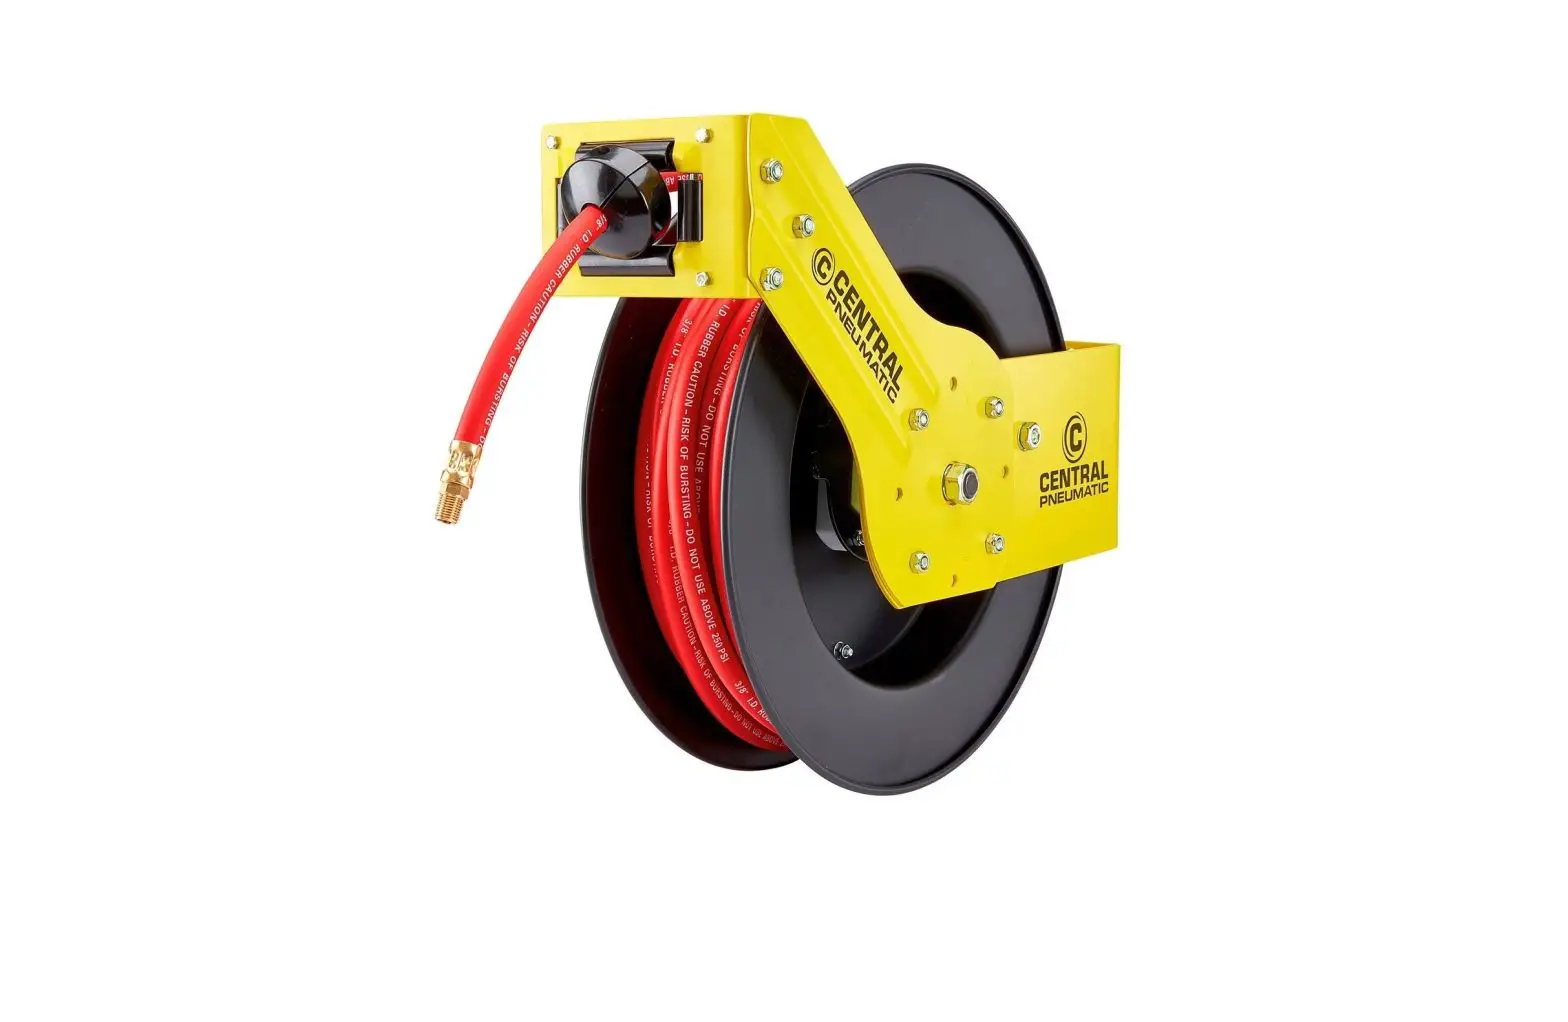 CENTRAL PNEUMATIC Retractable Hose Reel with 50ft Air Hose Owner's Manual